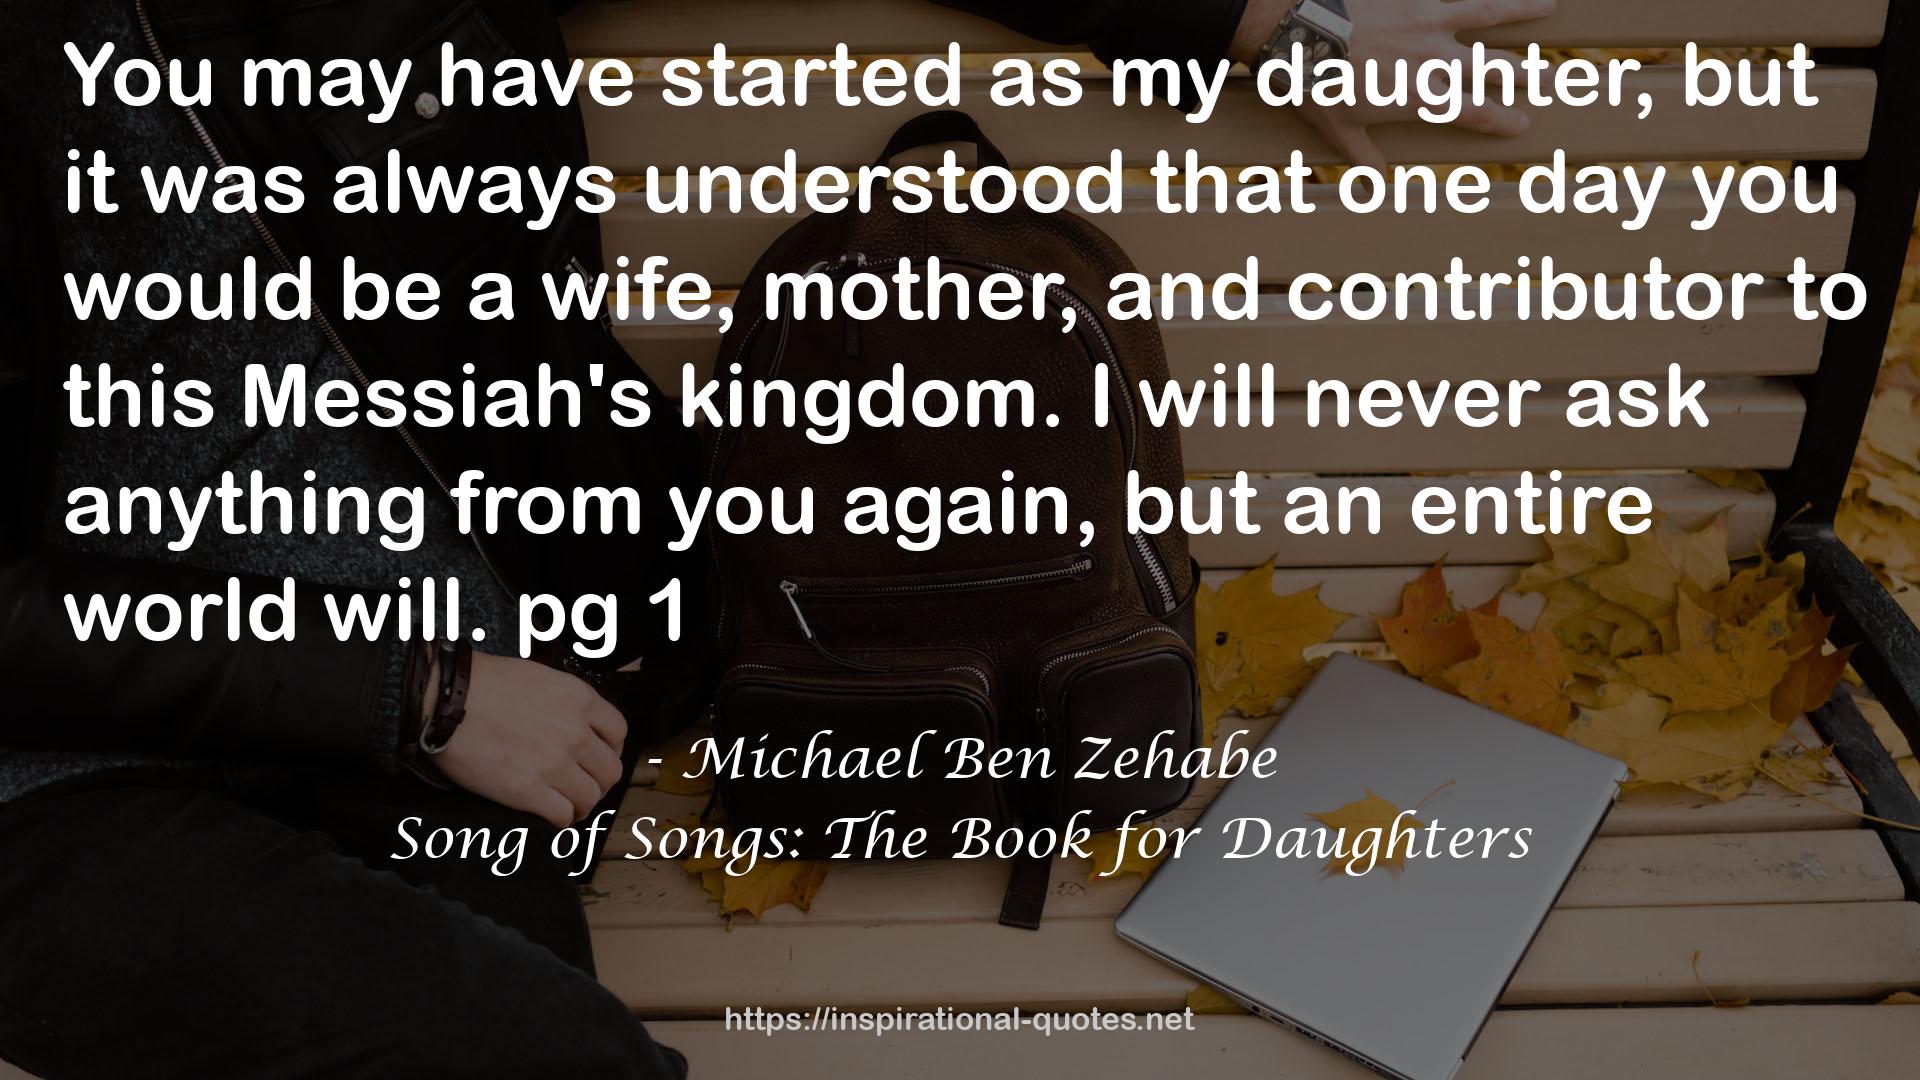 Song of Songs: The Book for Daughters QUOTES